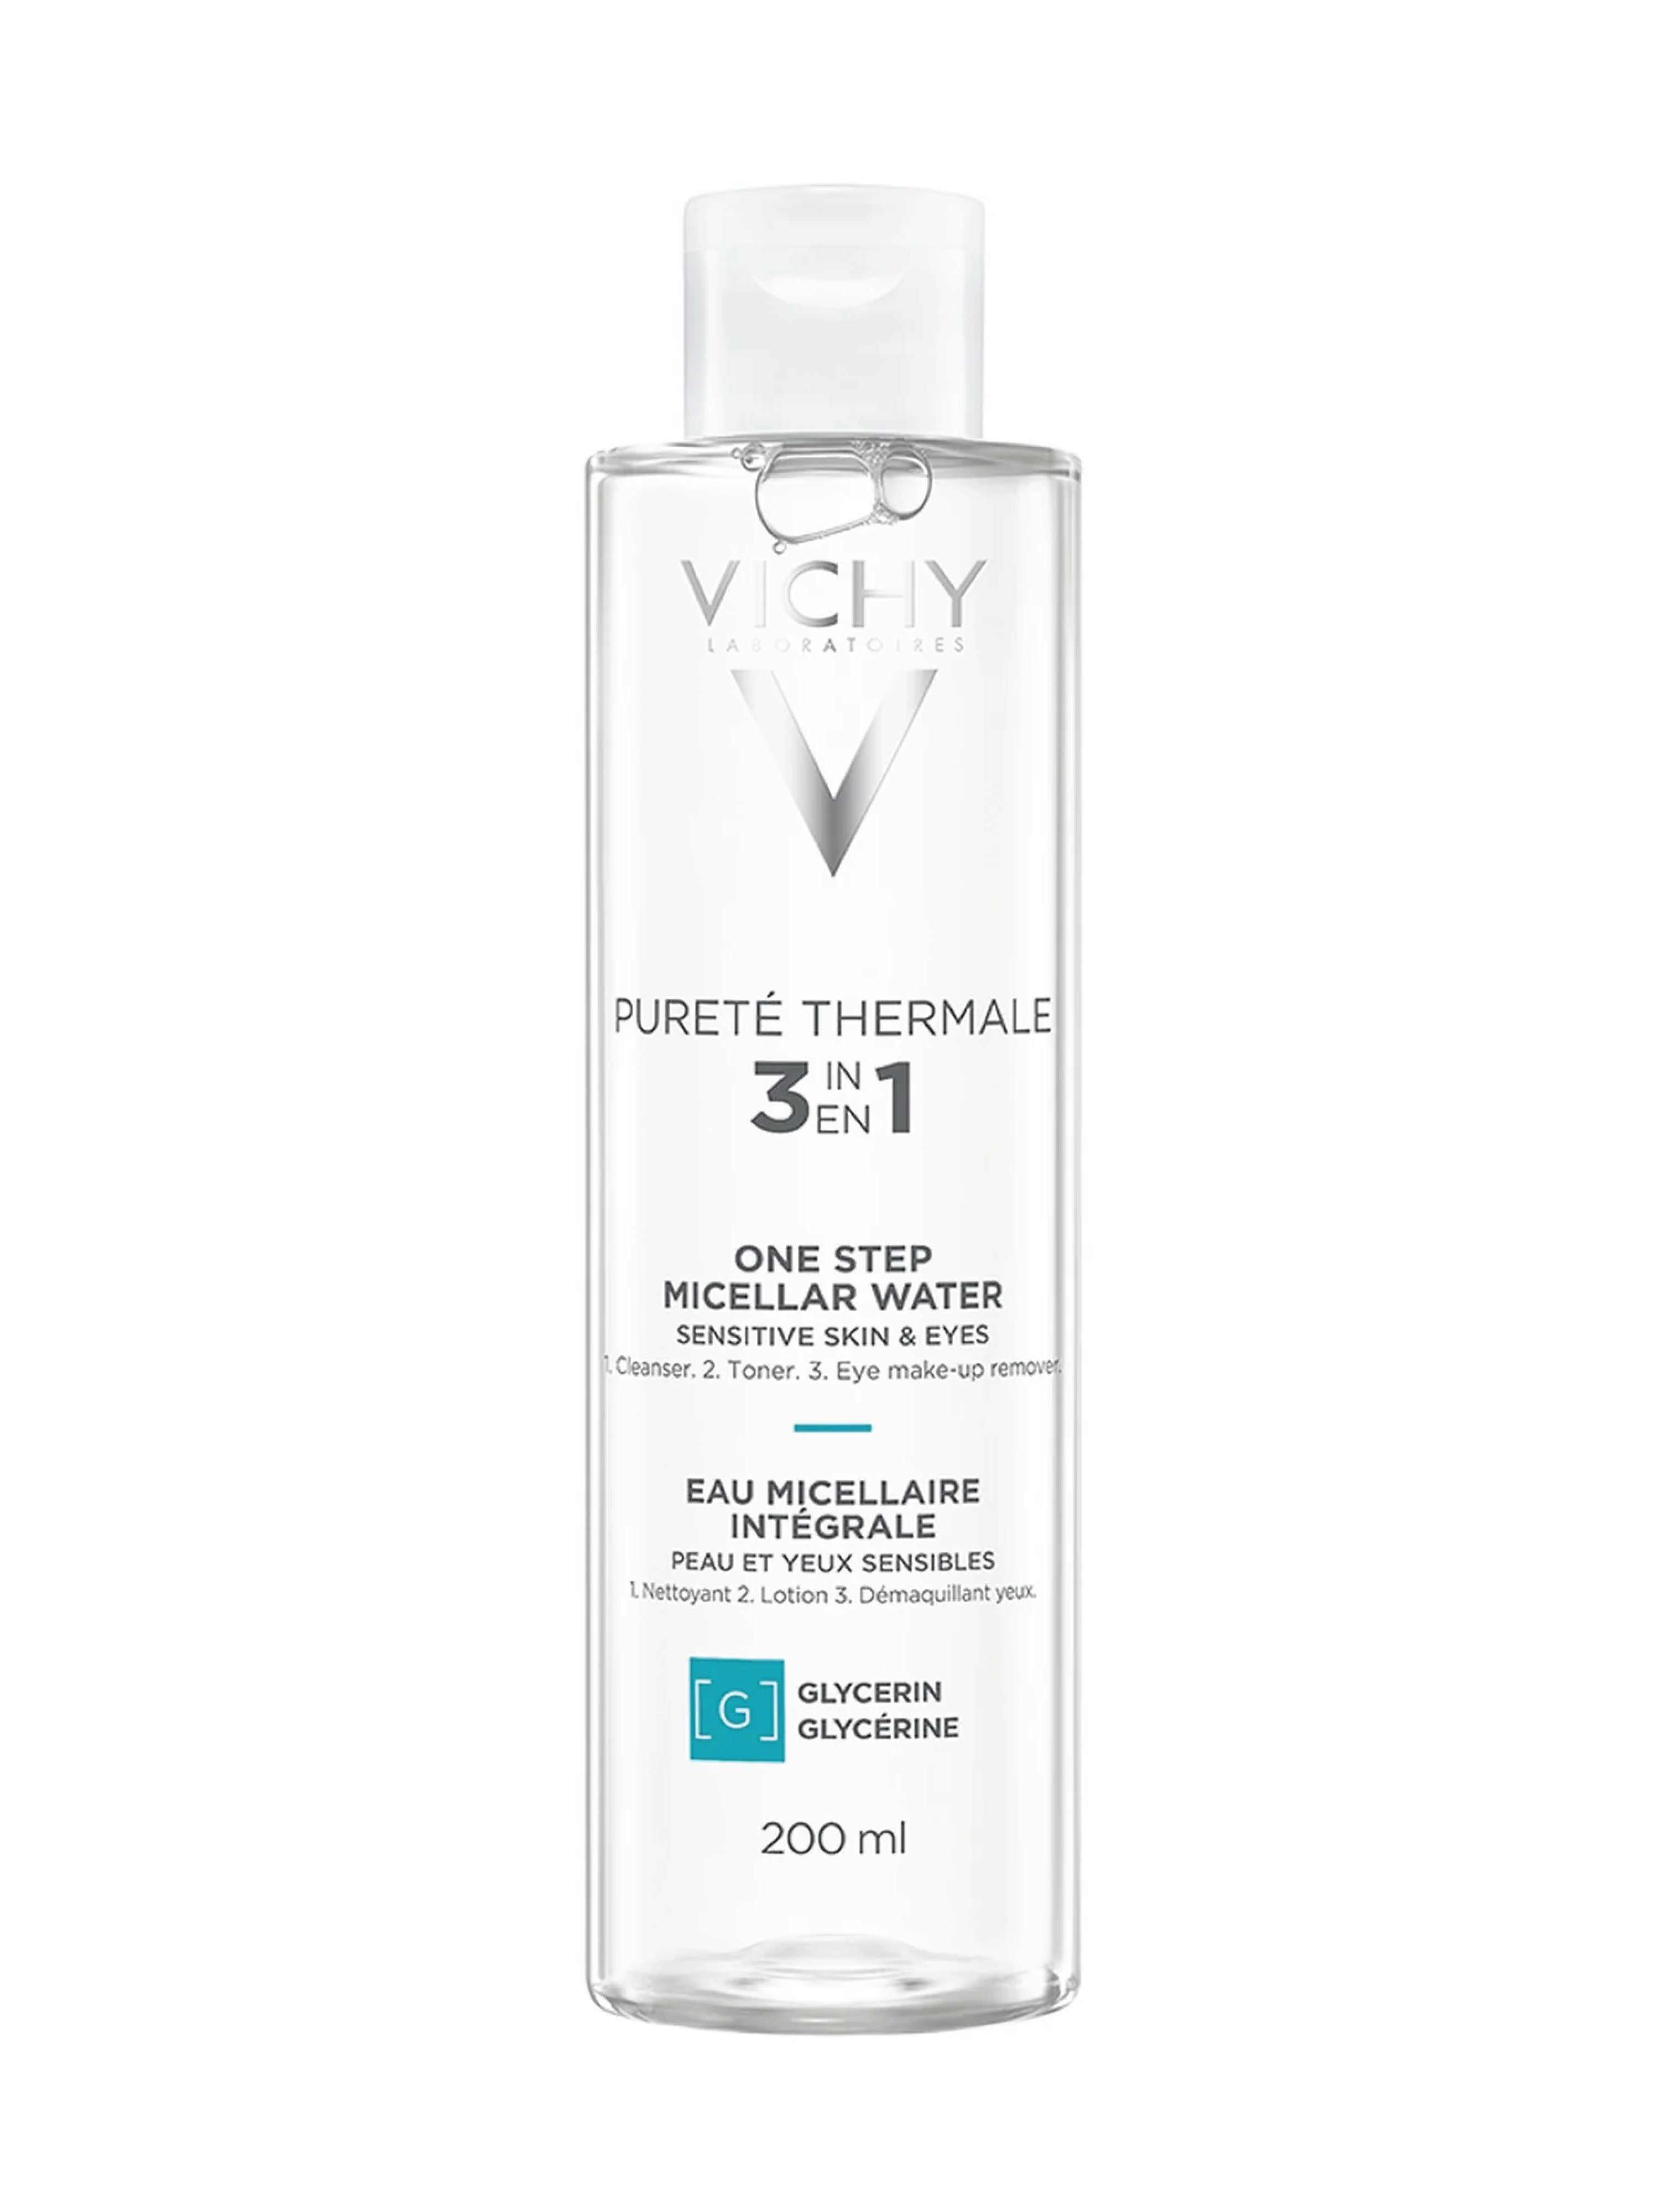 Vichy Purete Thermale Mineral Micellar Water, 200 ml